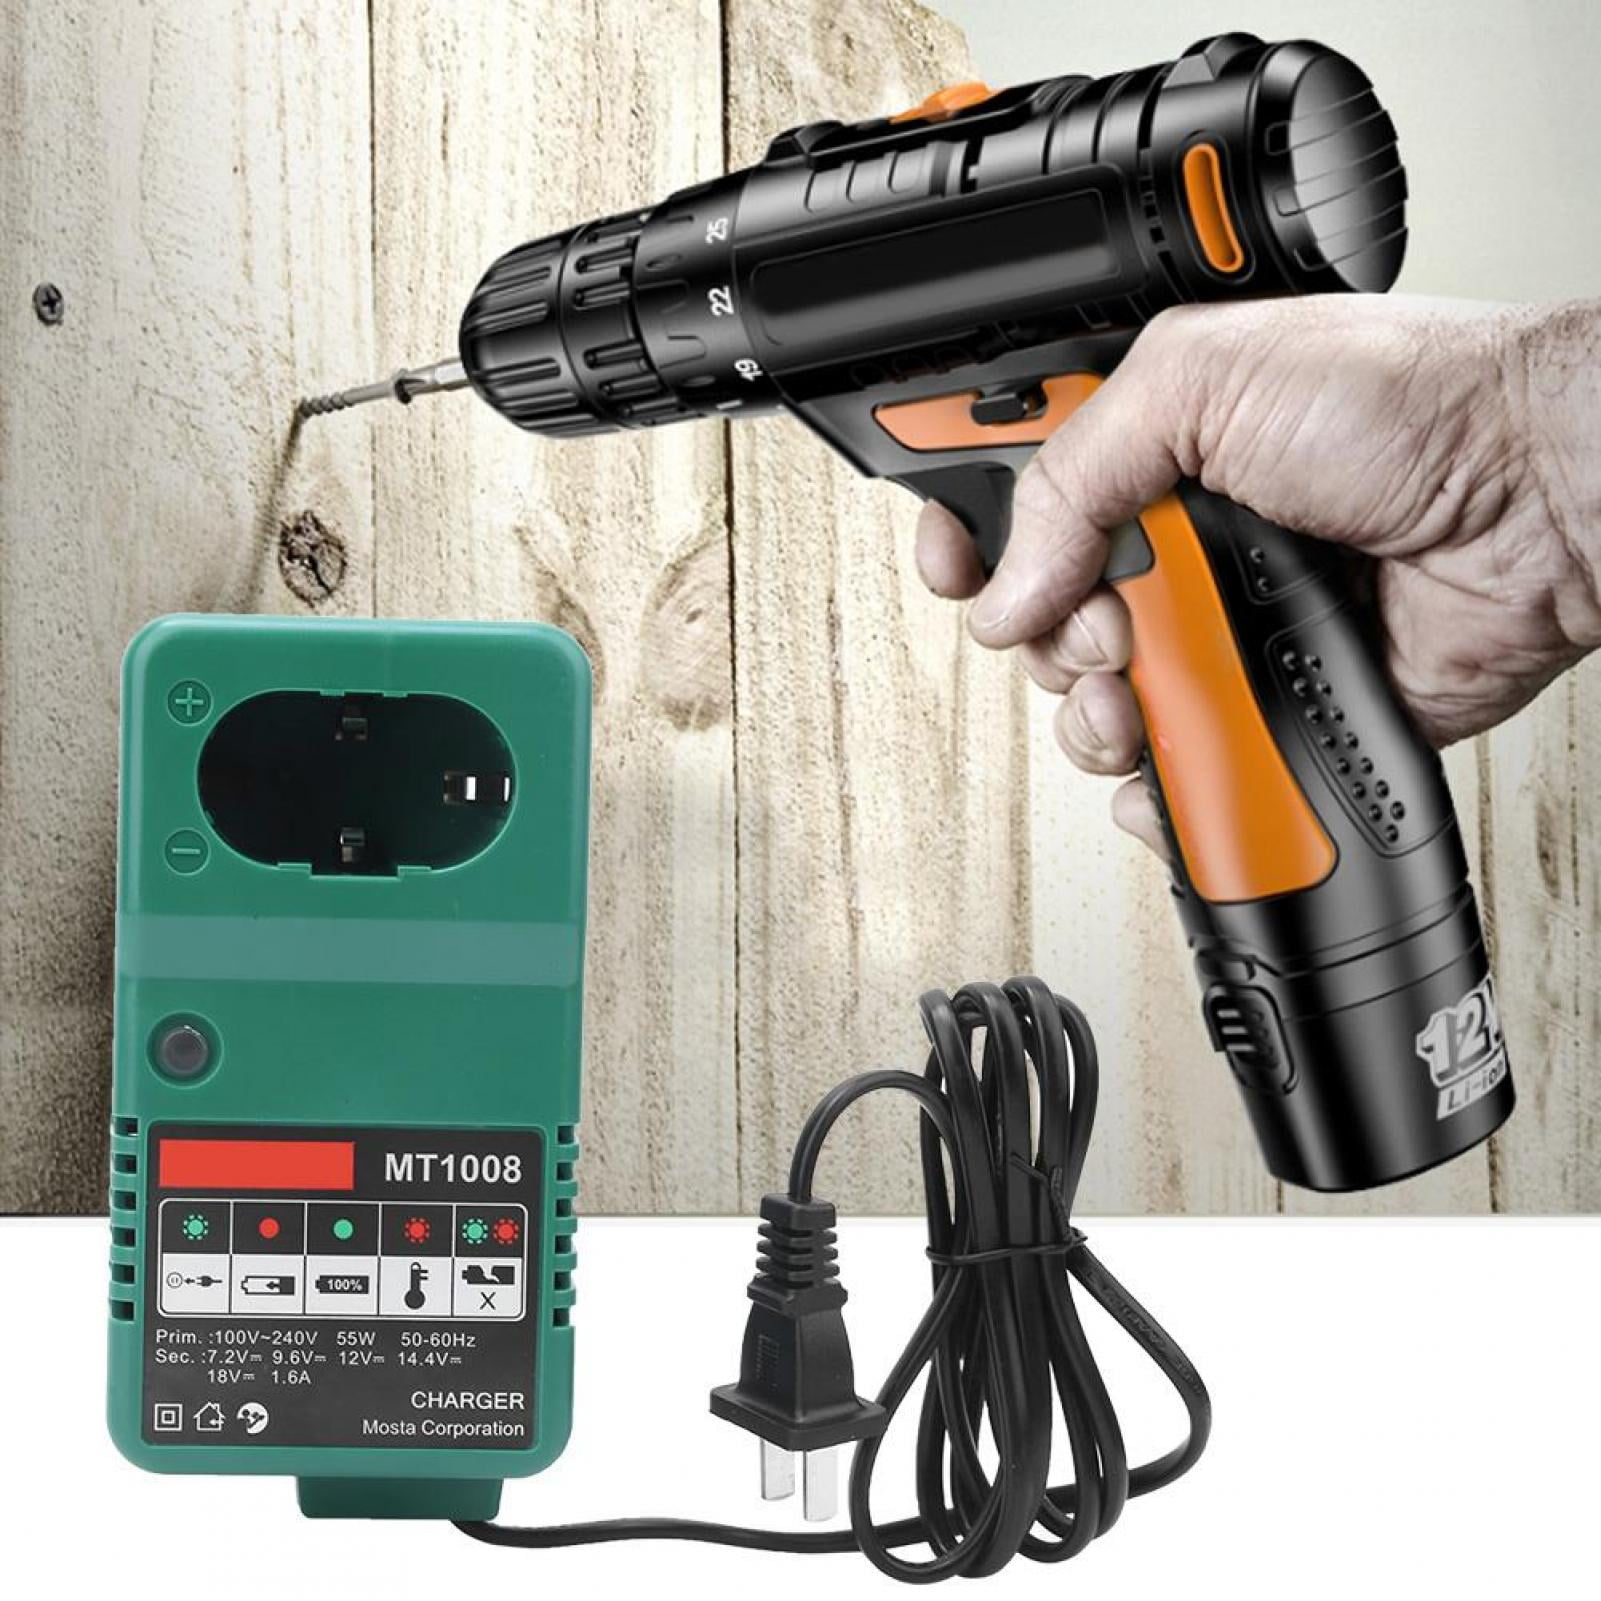 18V 2G Drill Driver + 200mA Charger + 2 Batteries